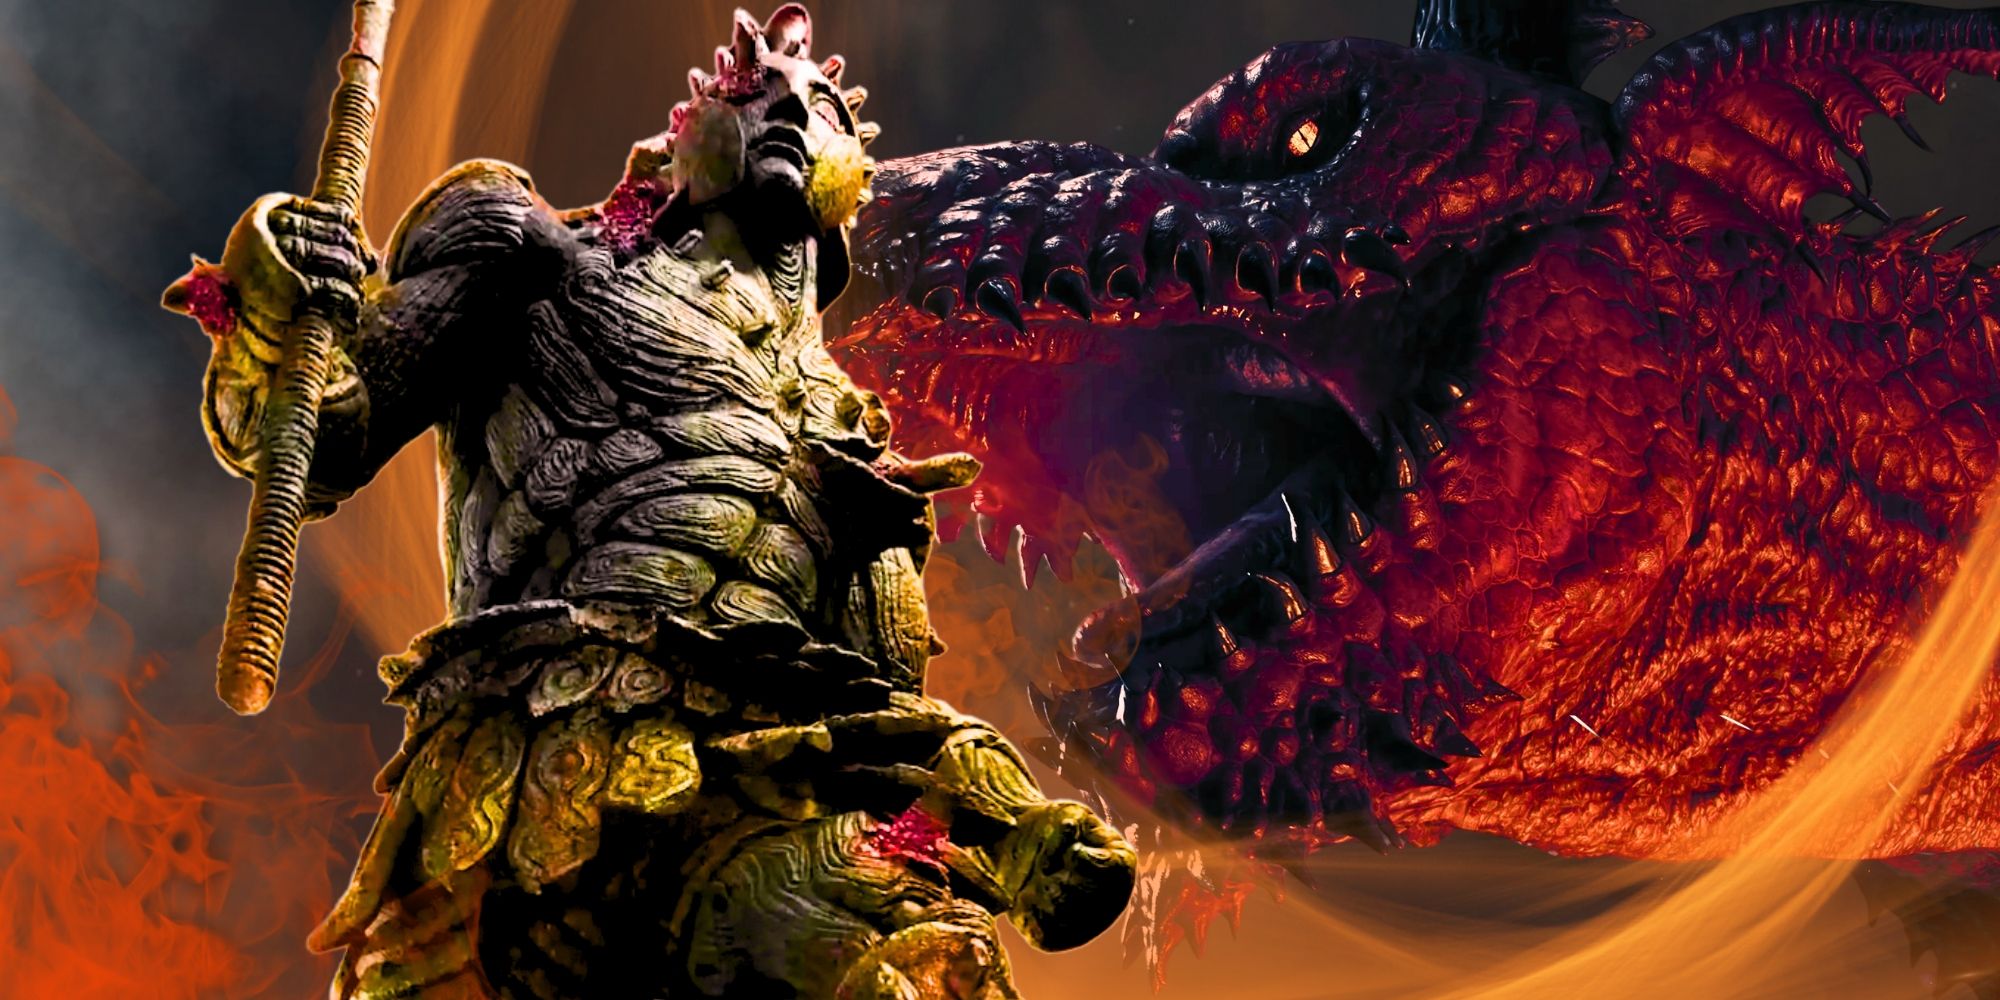 The Talos and the Dragon from Dragon's Dogma 2.